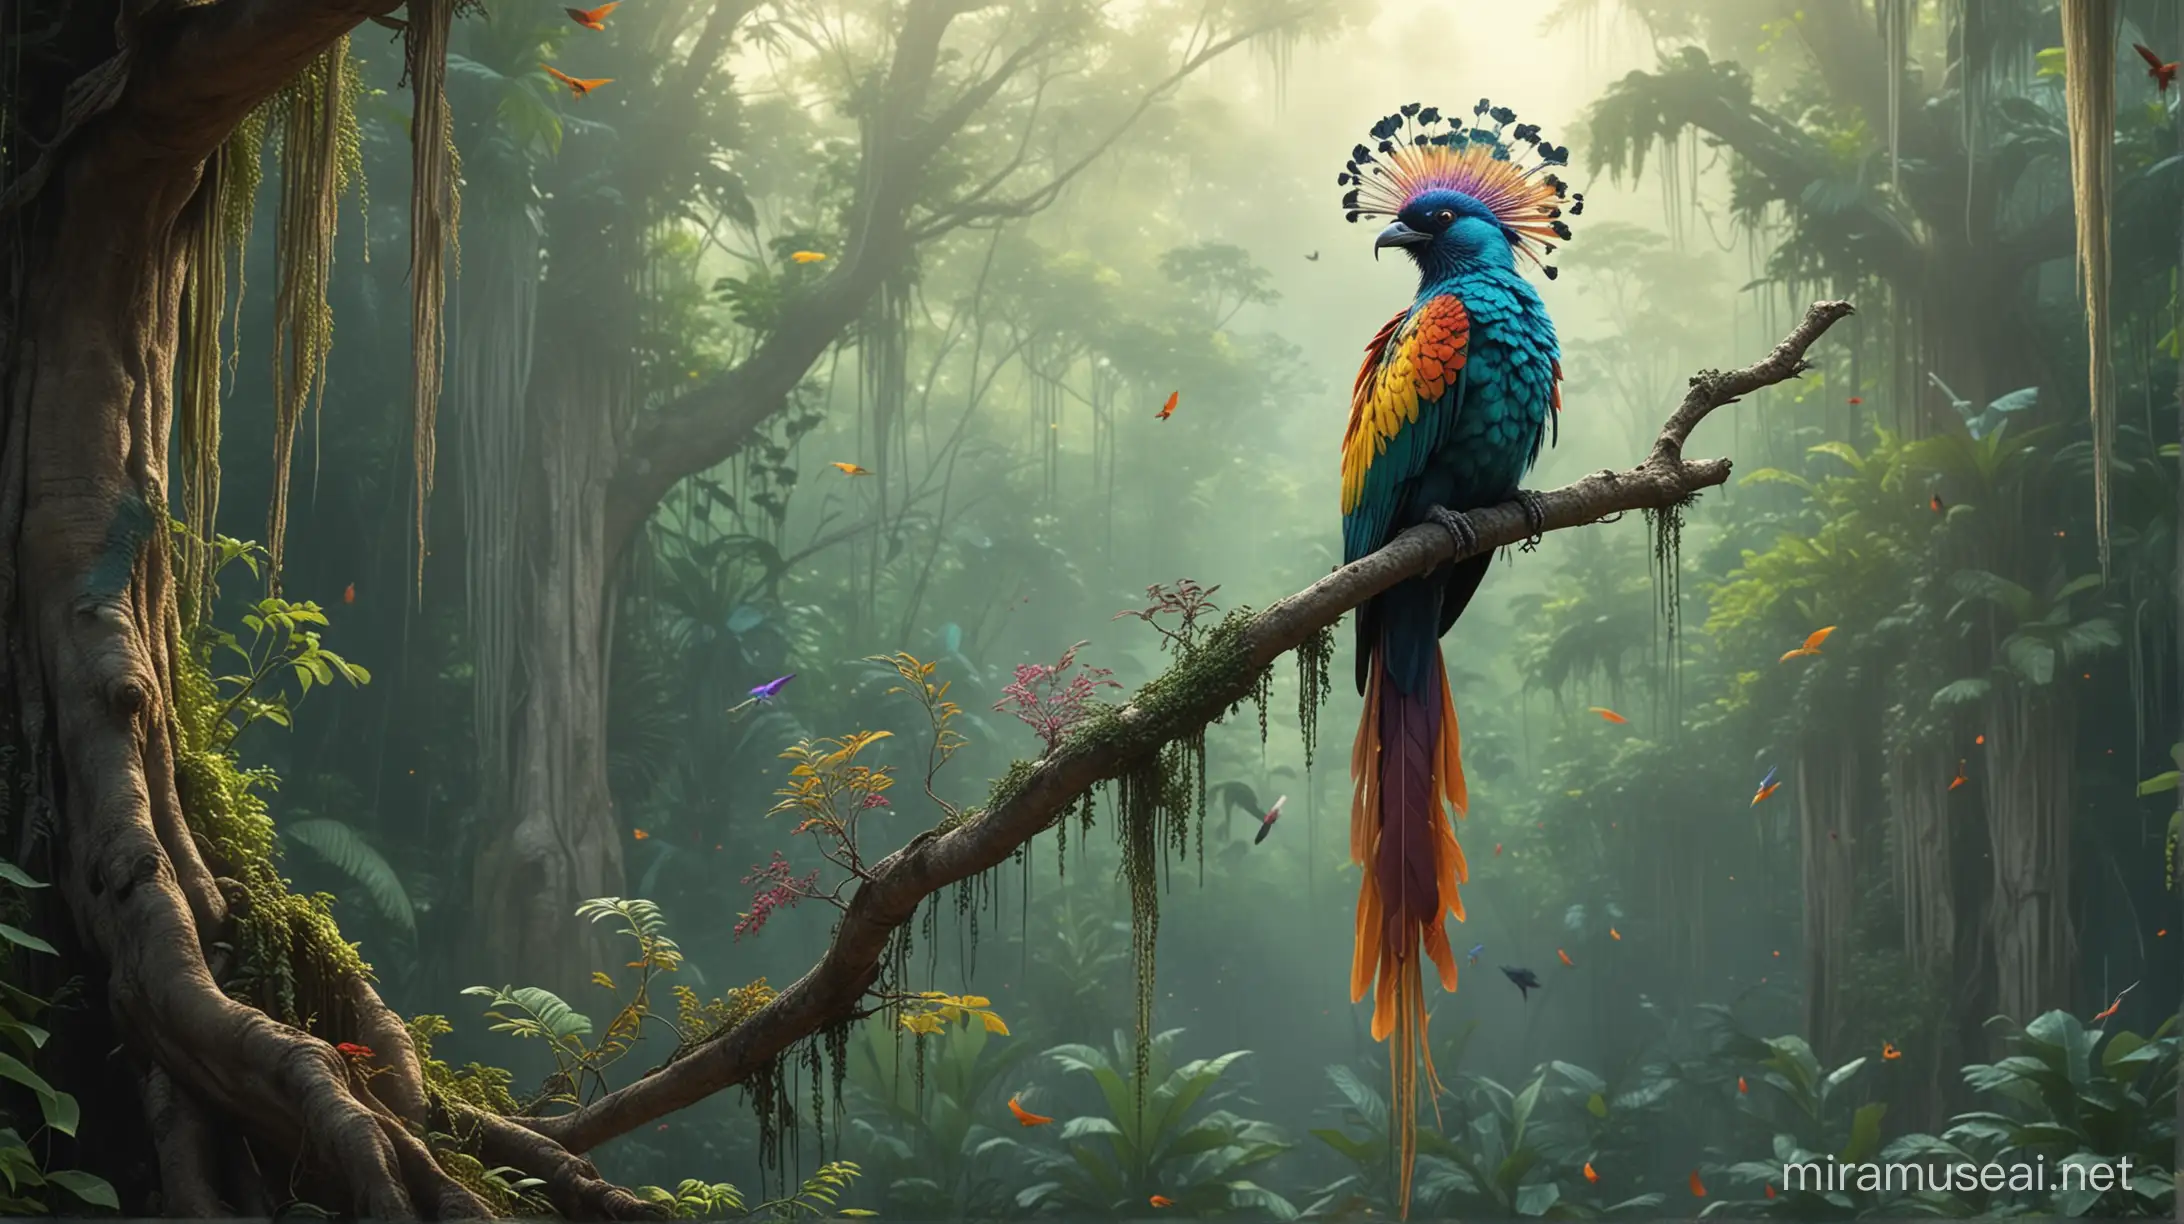 Mystical Jungle Bird Enchanting Creature Perched on Tall Tree